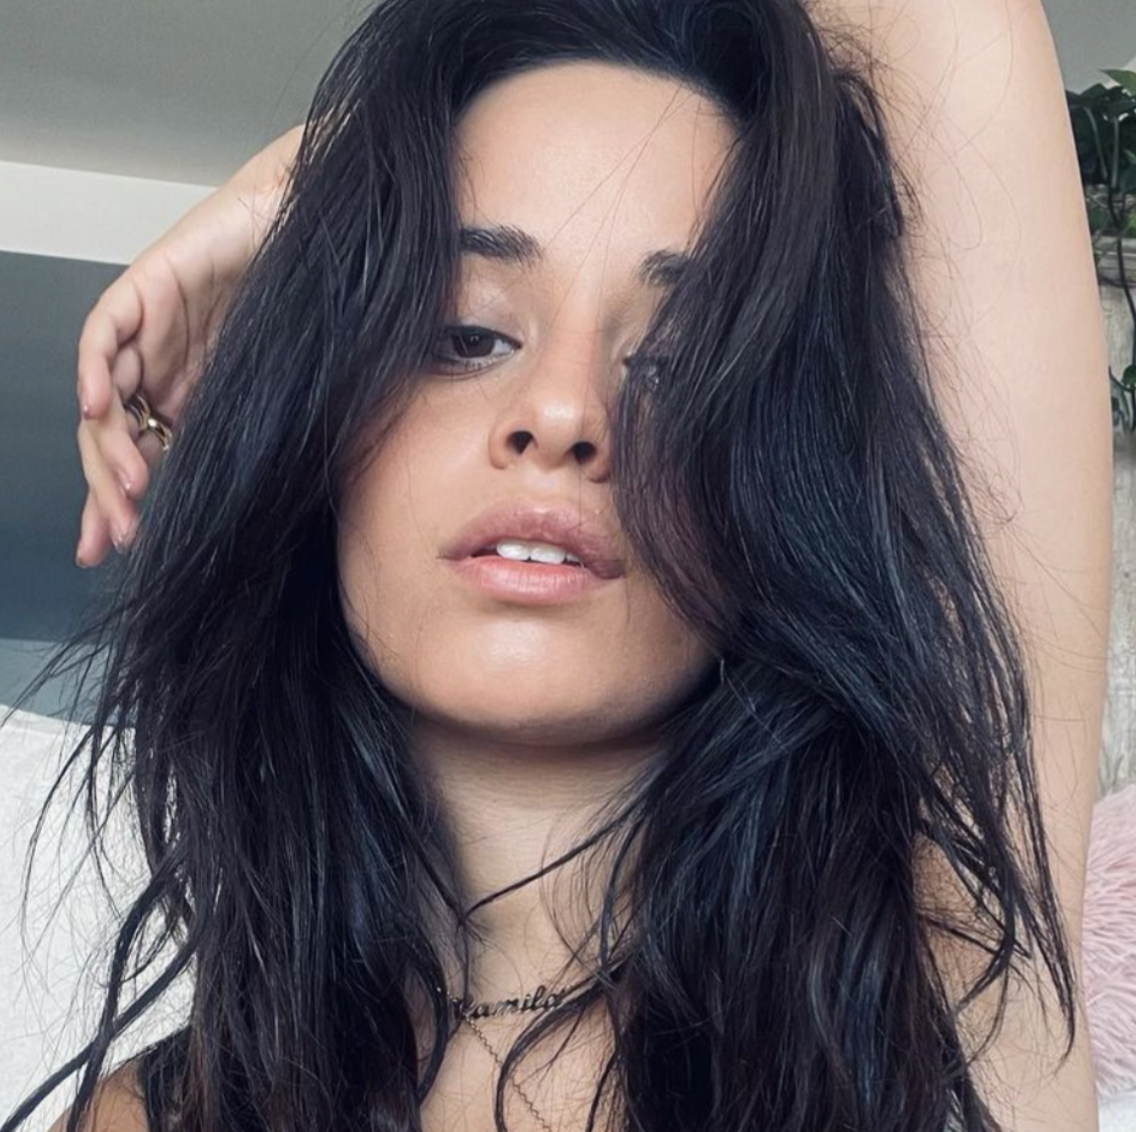 Camila Cabello Wore a String Bikini That Can Be Tied 9 Ways